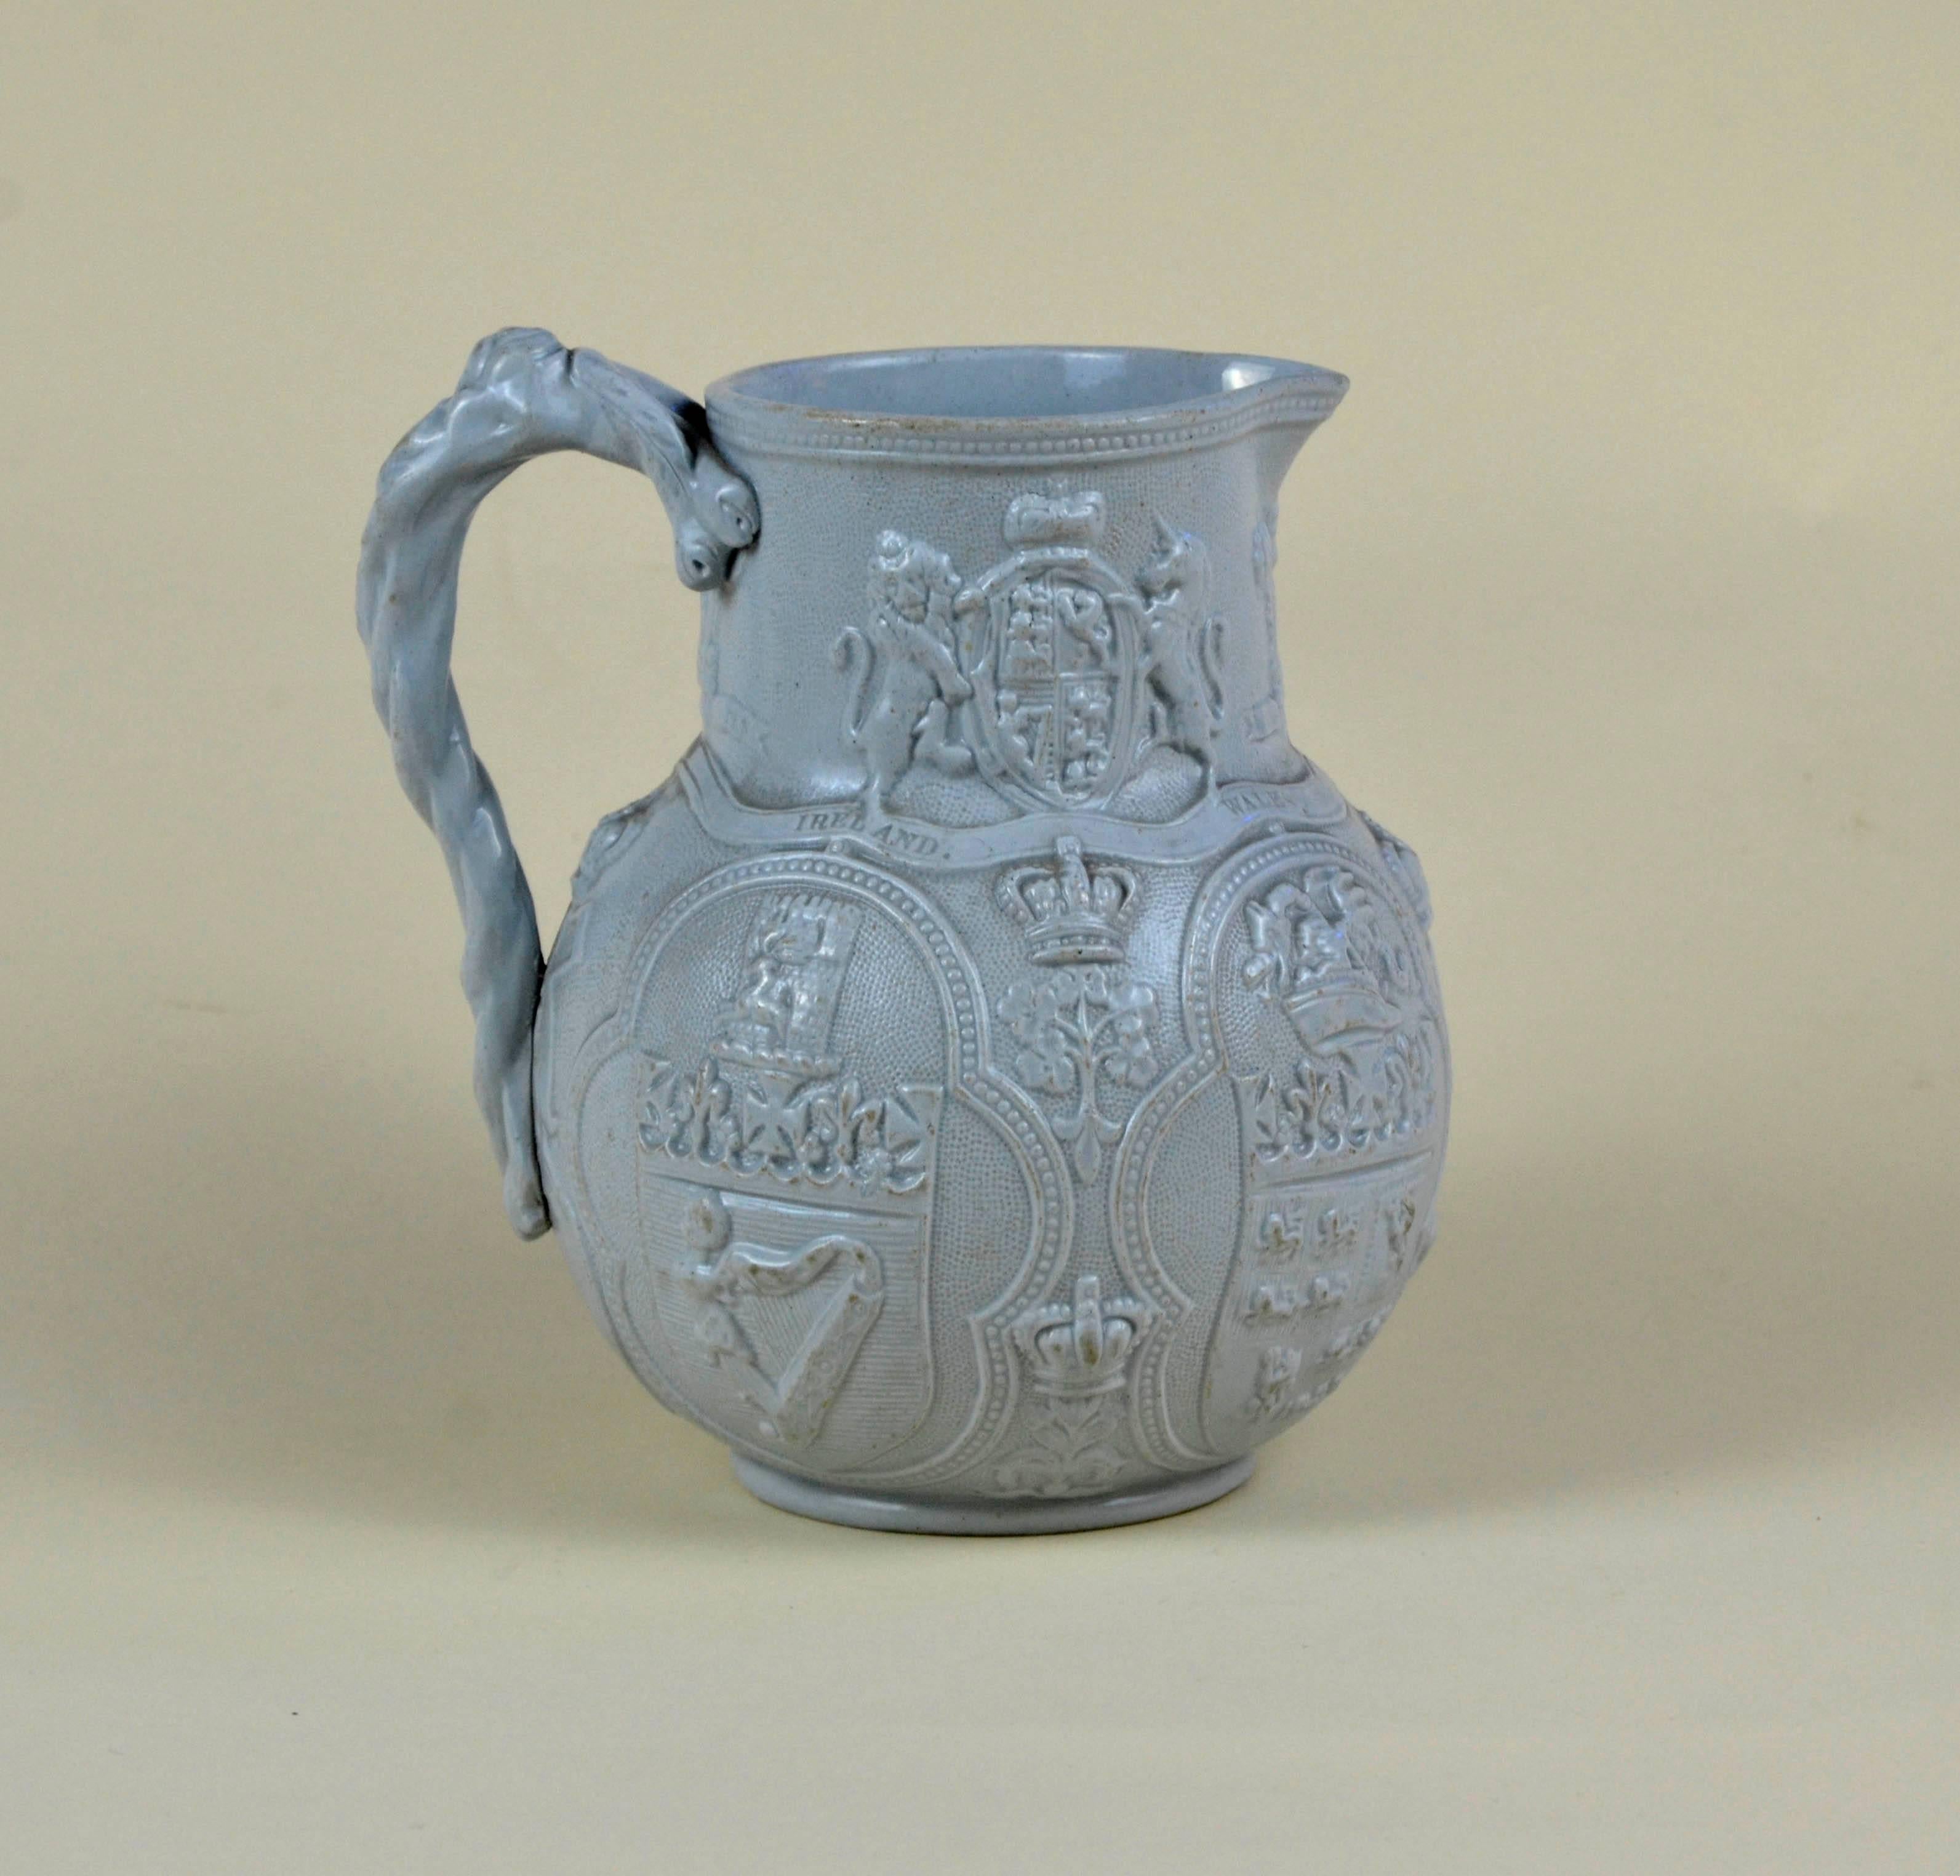 Blue-grey, relief moulded, smear glazed, stoneware jug. Globular body with cylindrical neck and projecting lip, decorated in relief and moulded in two parts. Applied, hand-modelled handle in the form of a twisted branch or vine. On the neck, the